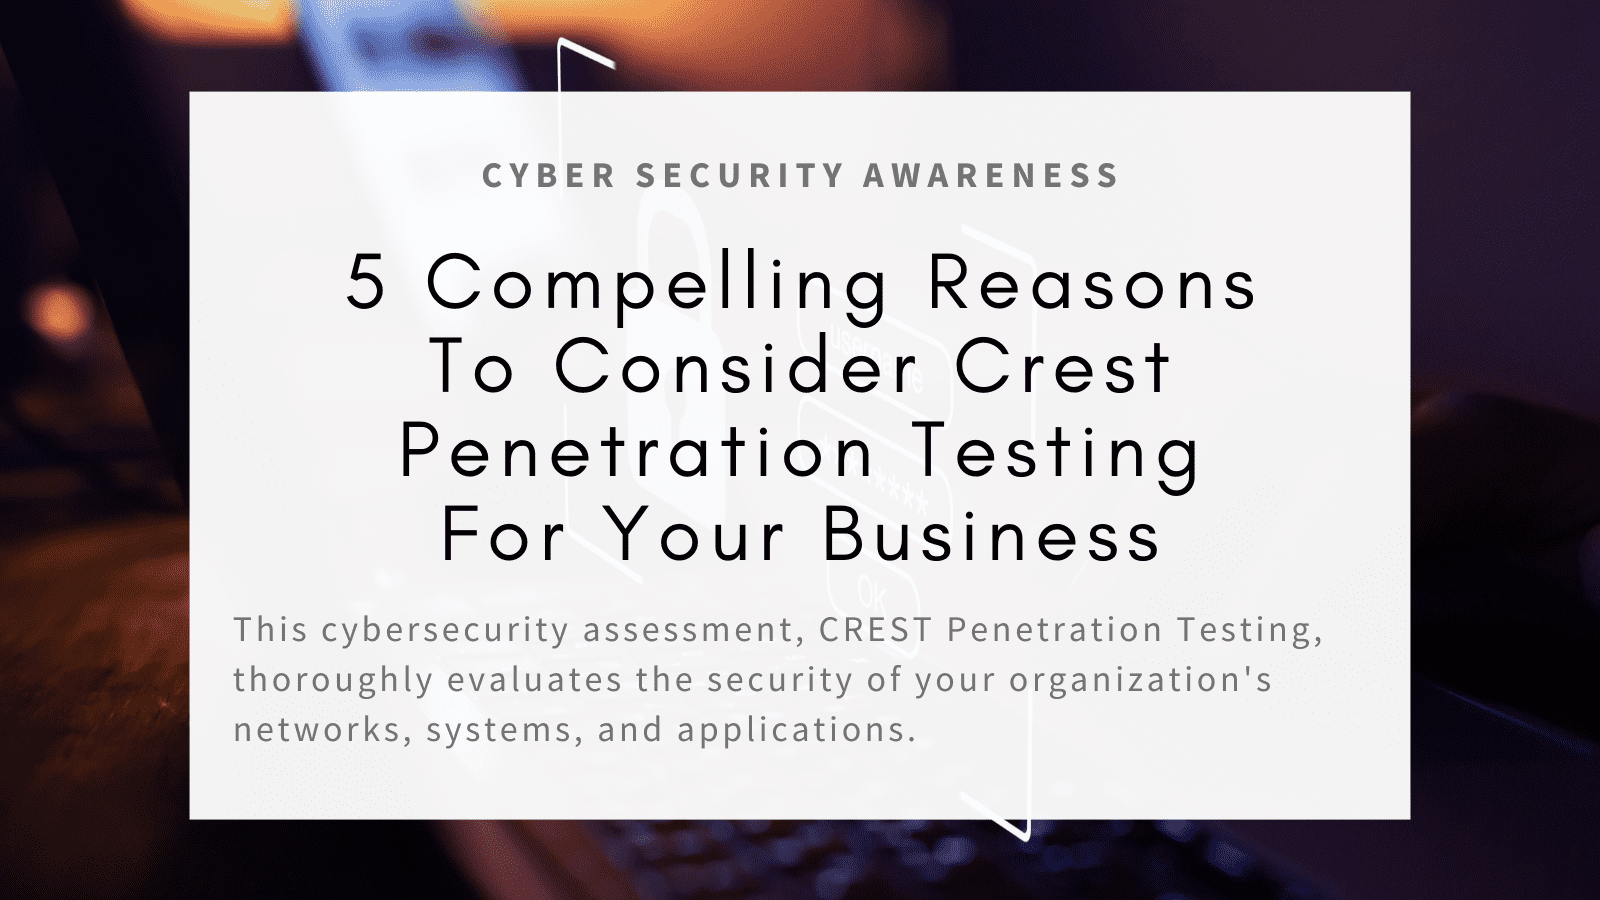 5 Compelling Reasons To Consider Crest Penetration Testing For Your Business